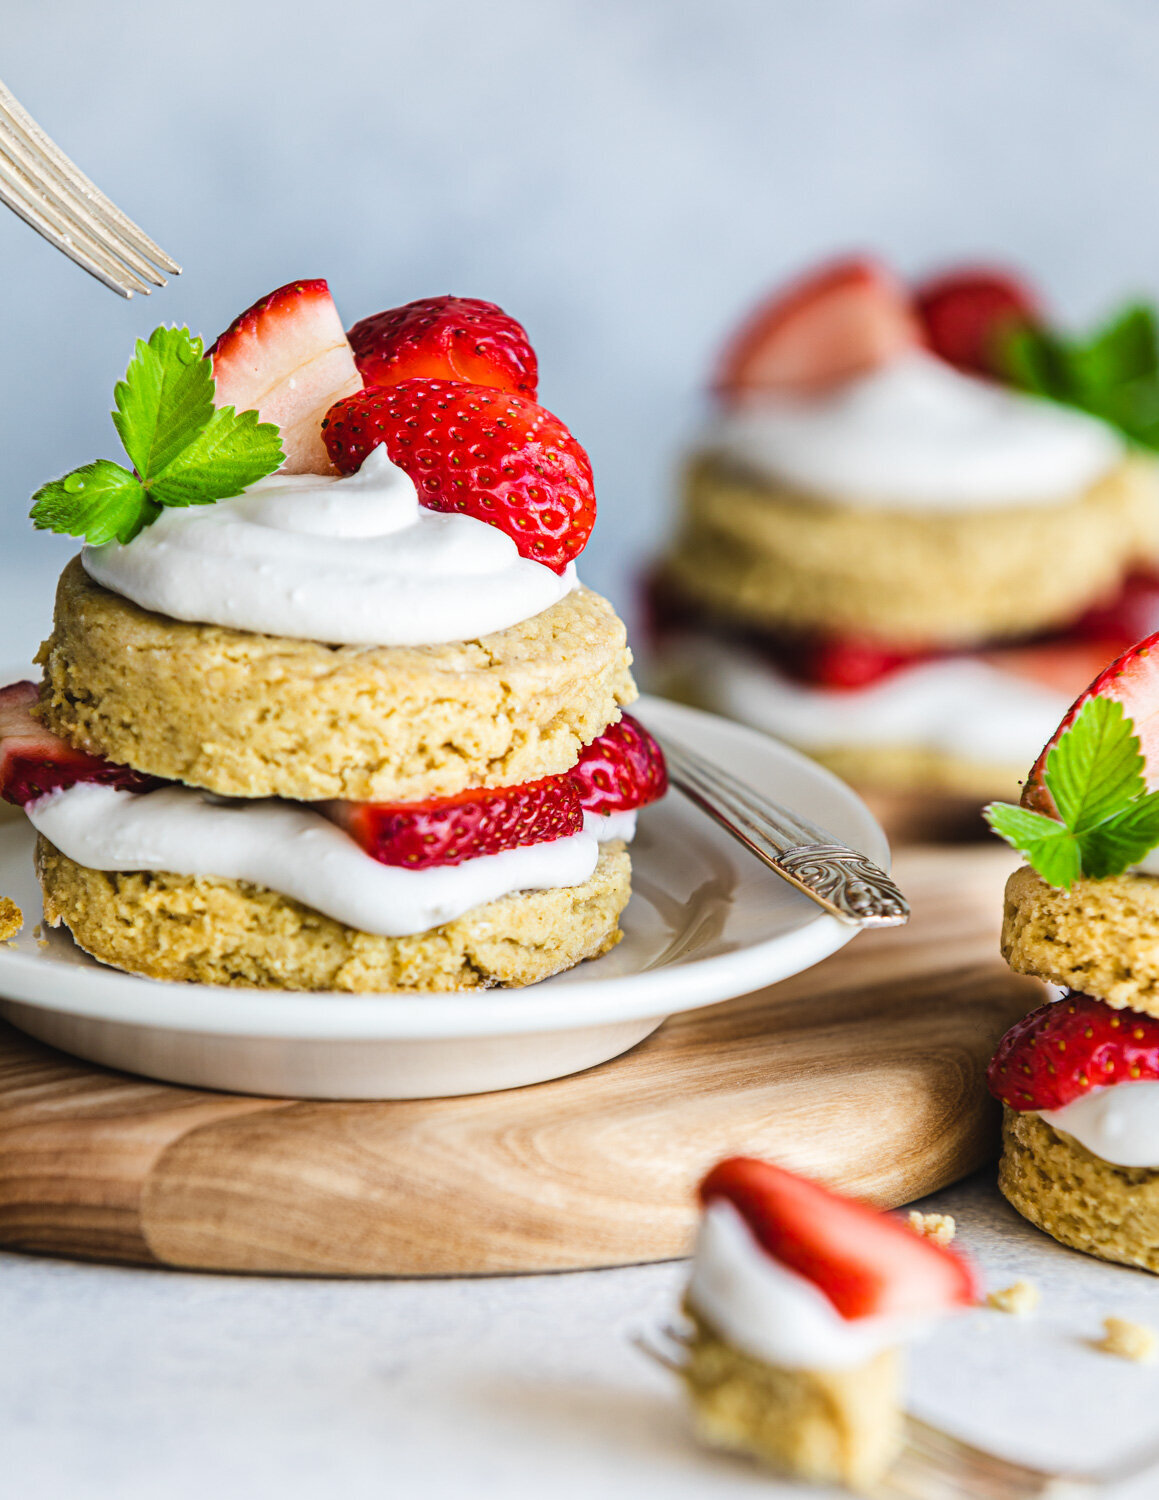 Vegan Lemon Almond Cake With Coconut Whipped Cream & Macerated Strawberries  - Domestic Gothess